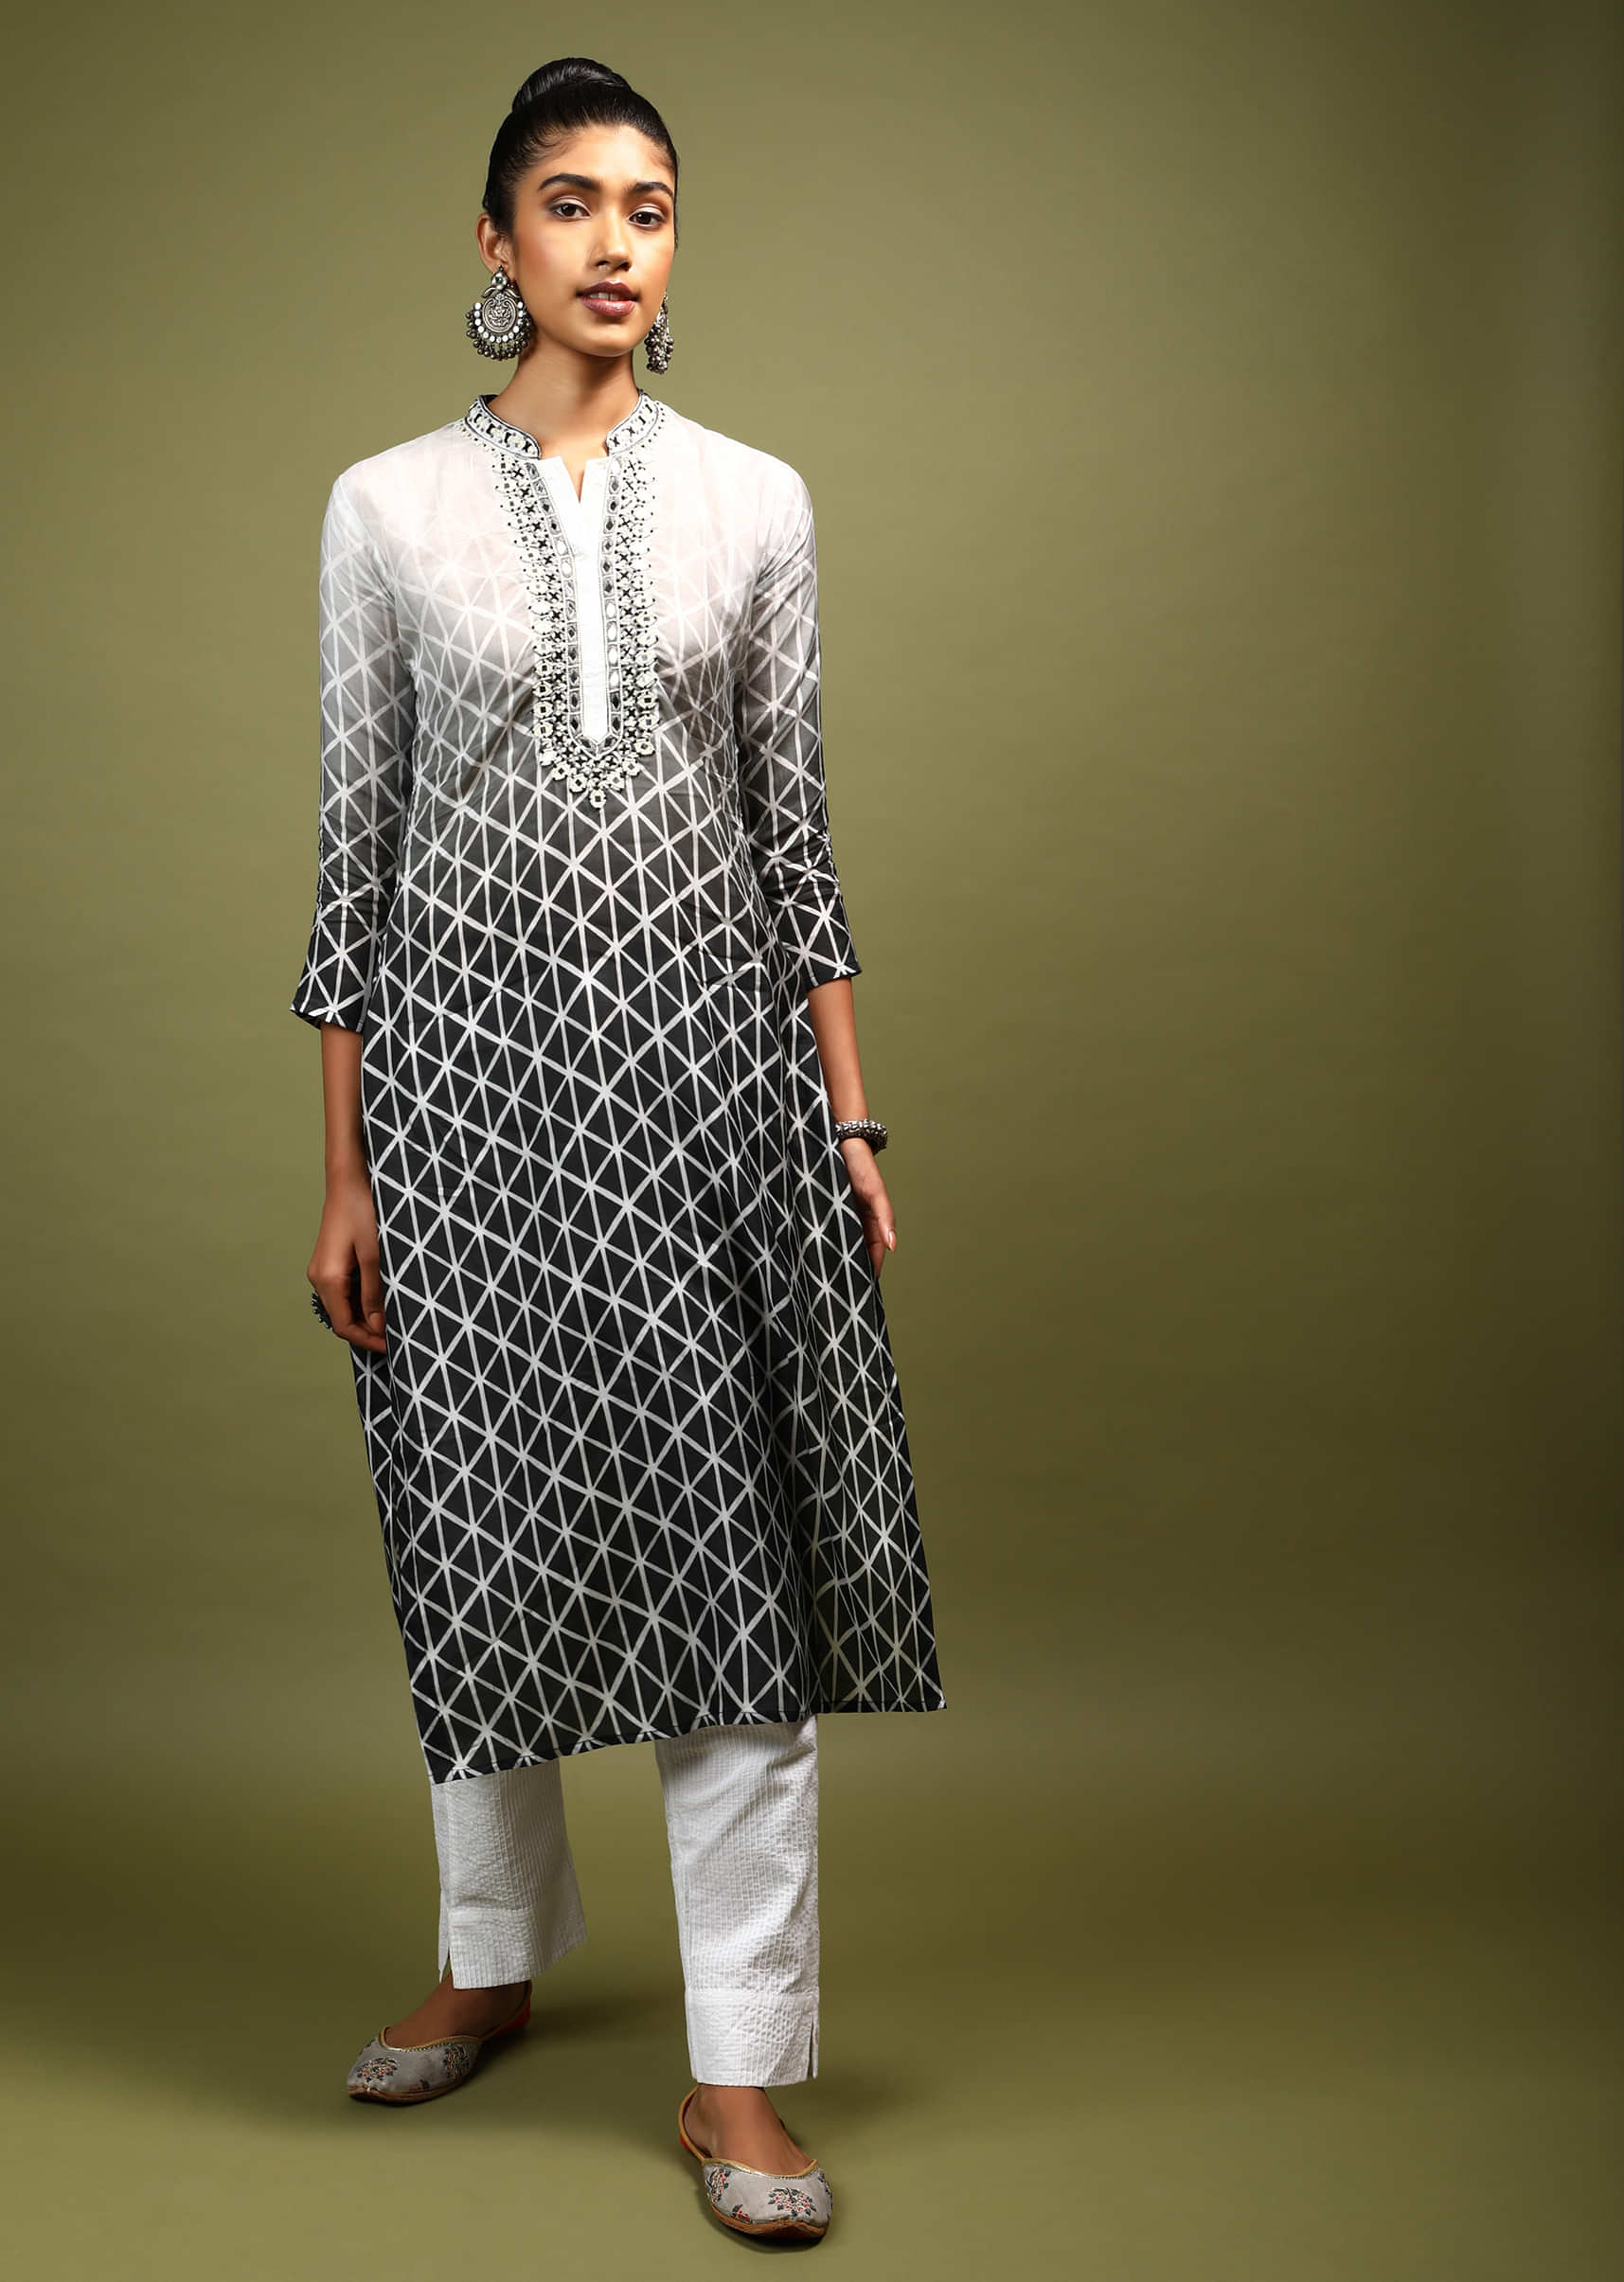 Black Shaded Kurta In Cotton With Batik Printed Geometric Design All Over And Mirror Embellished Neckline 